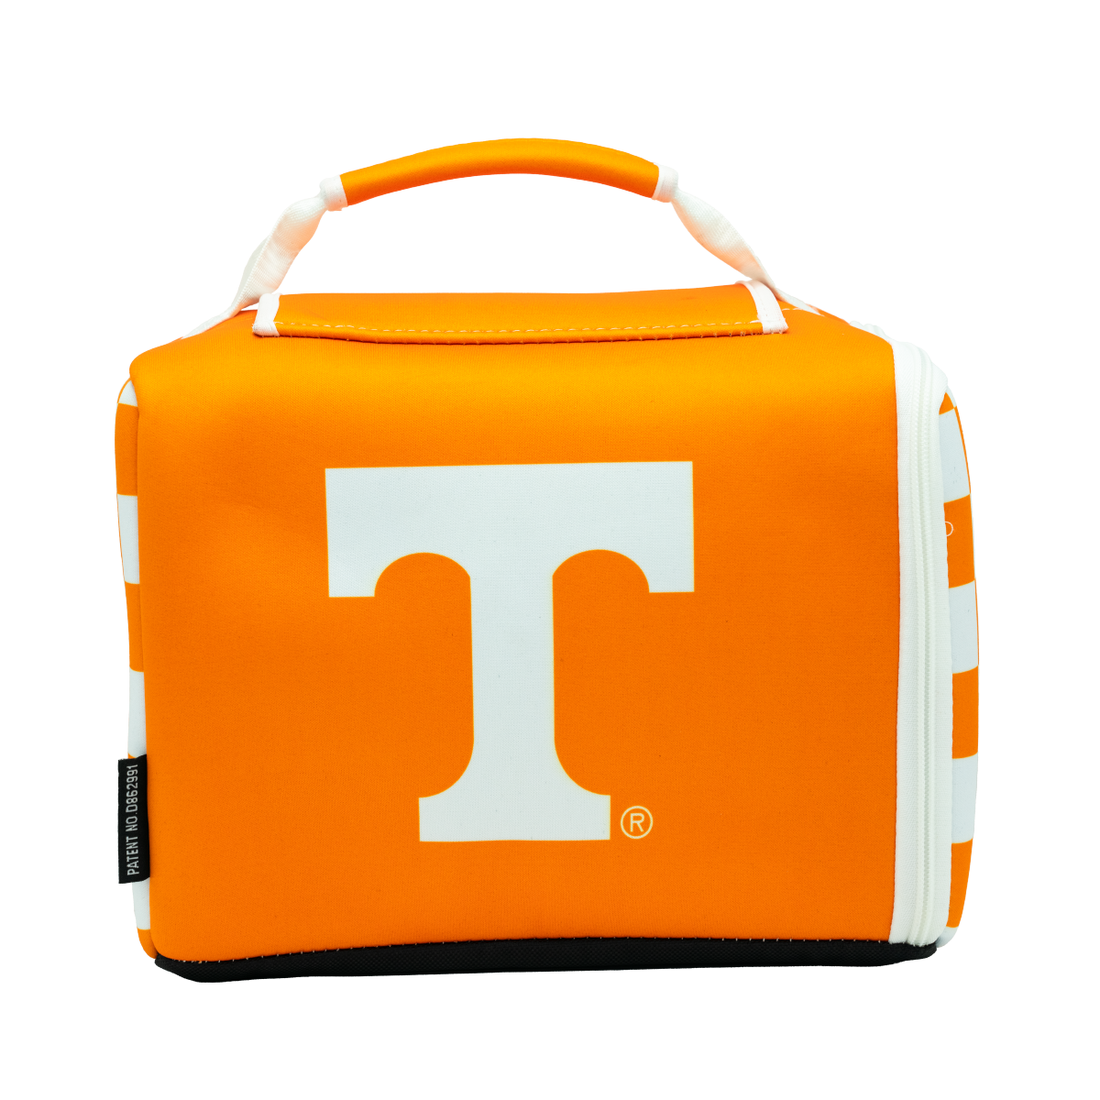 University of Tennessee Knoxville Licensed 12-Pack Kase Mate